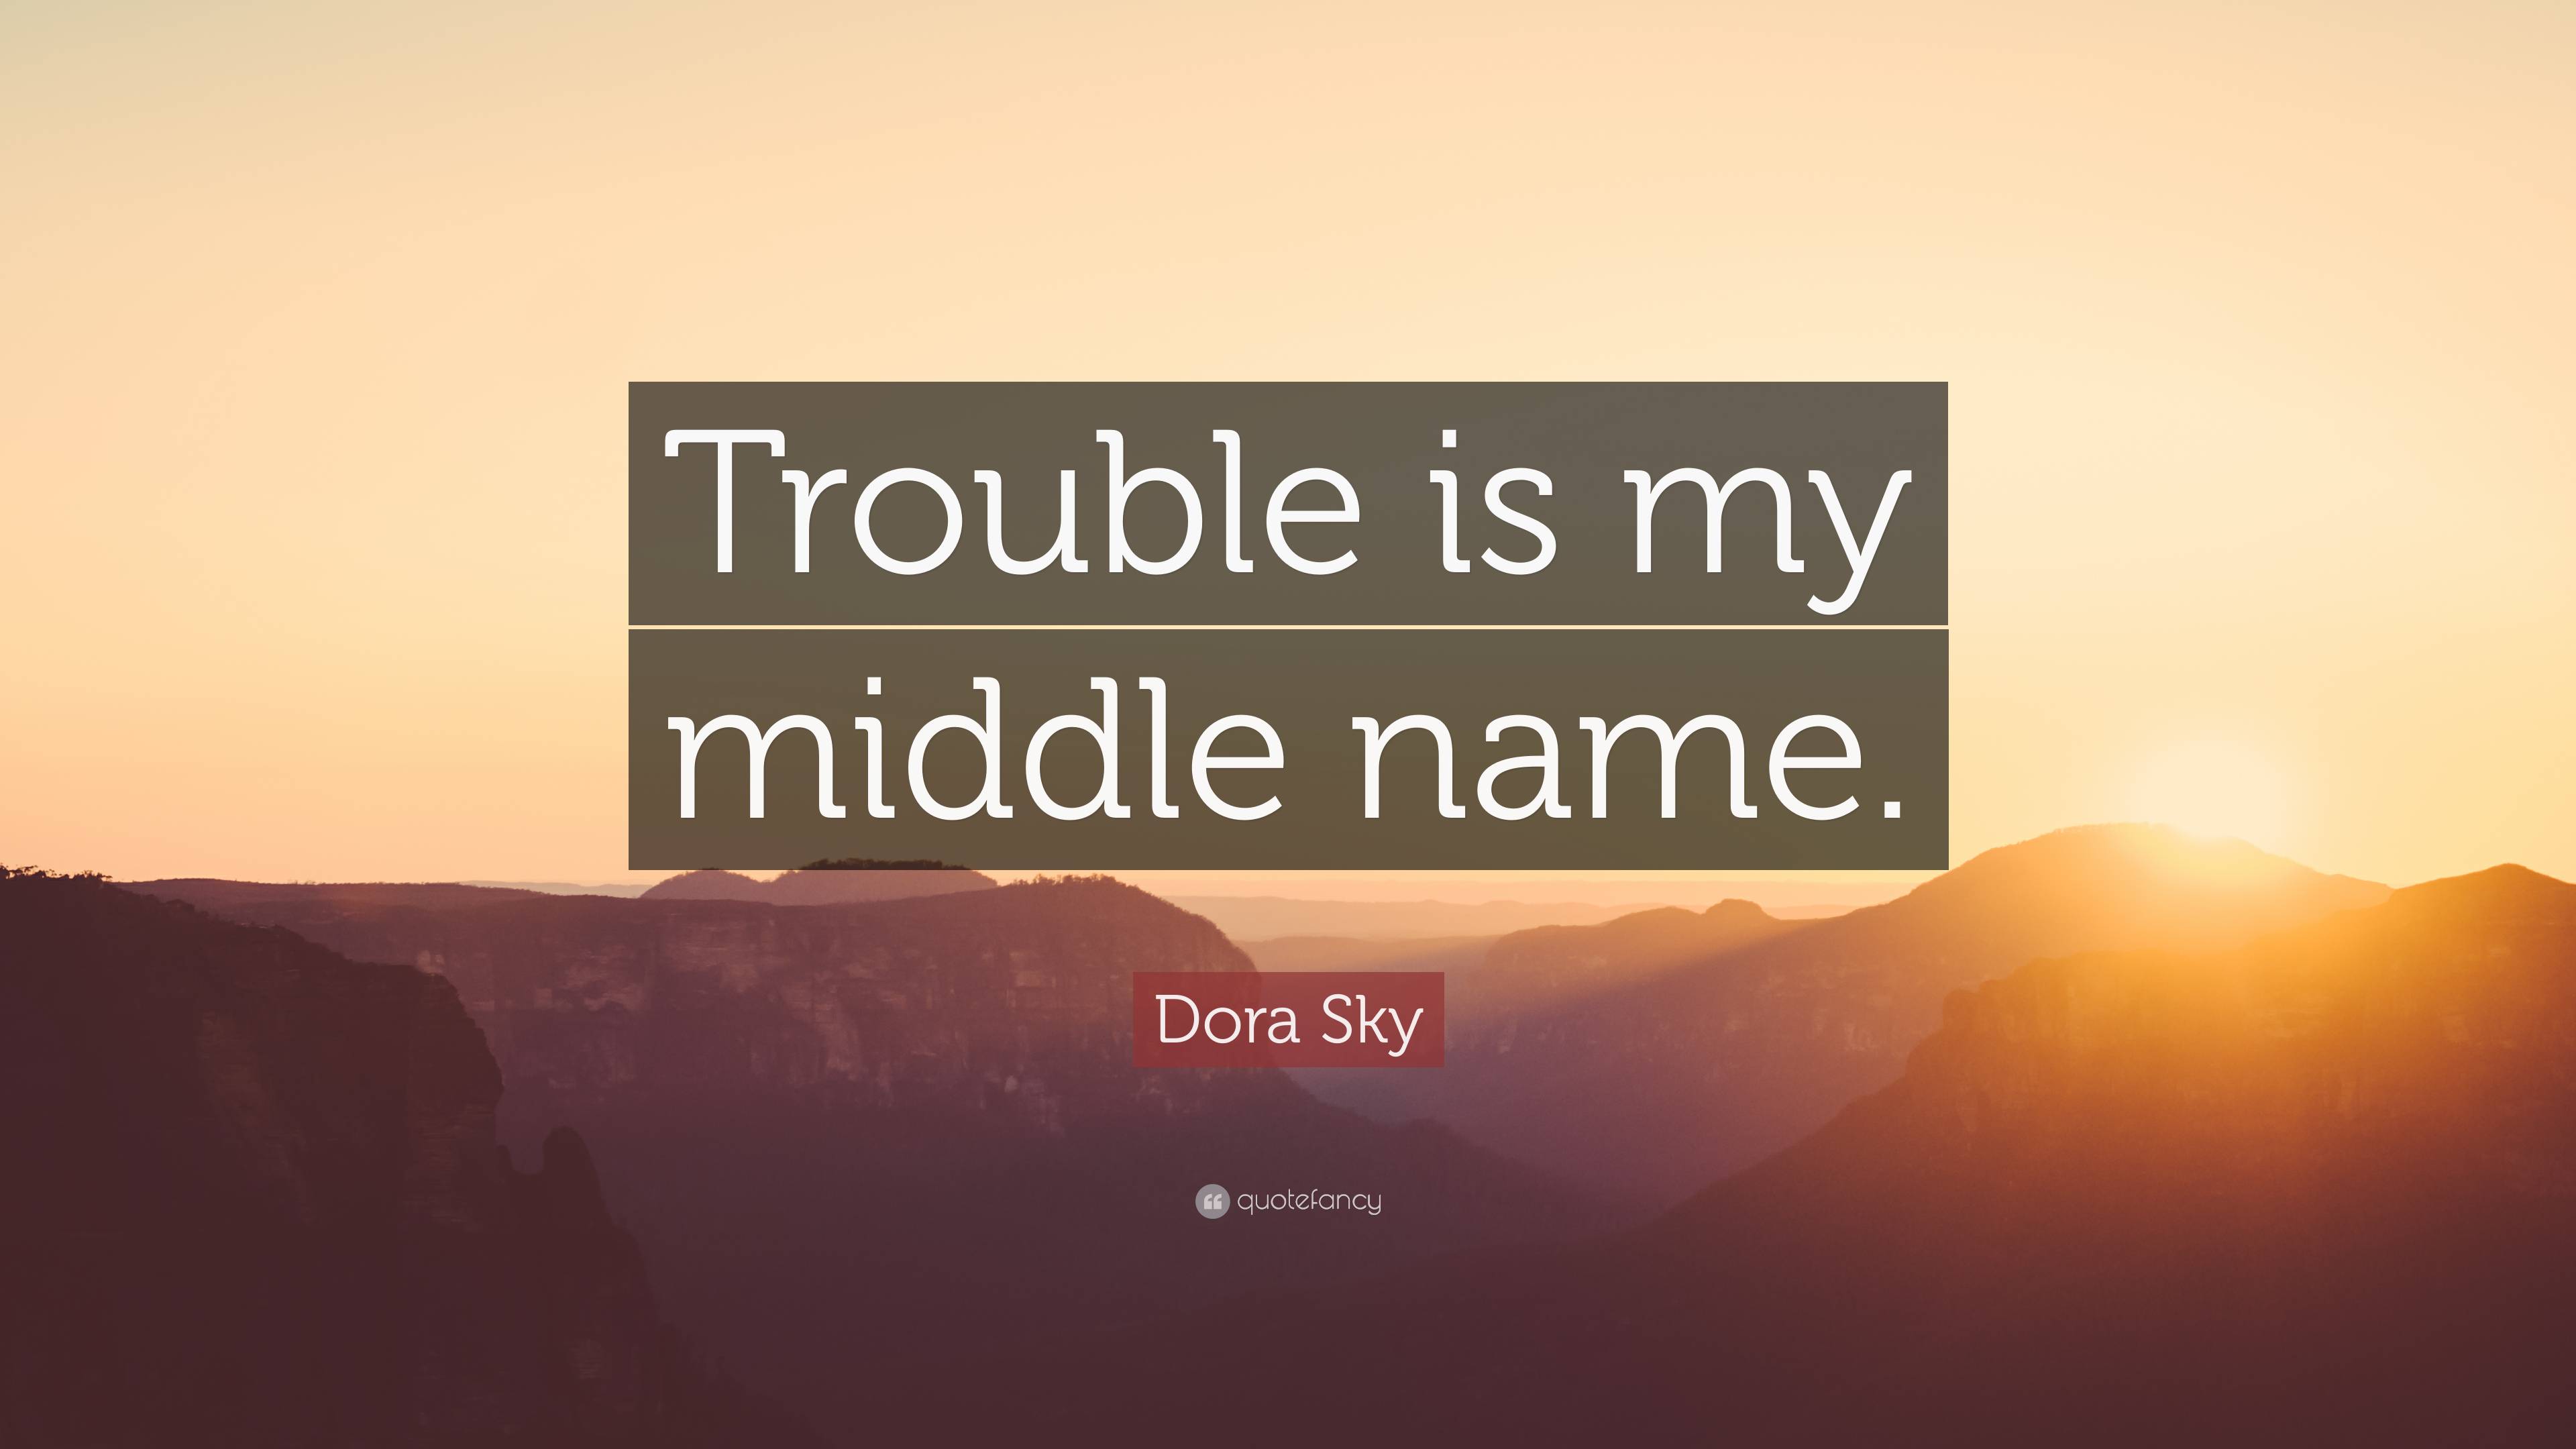 Dora Sky Quote: “Trouble is my middle name.”